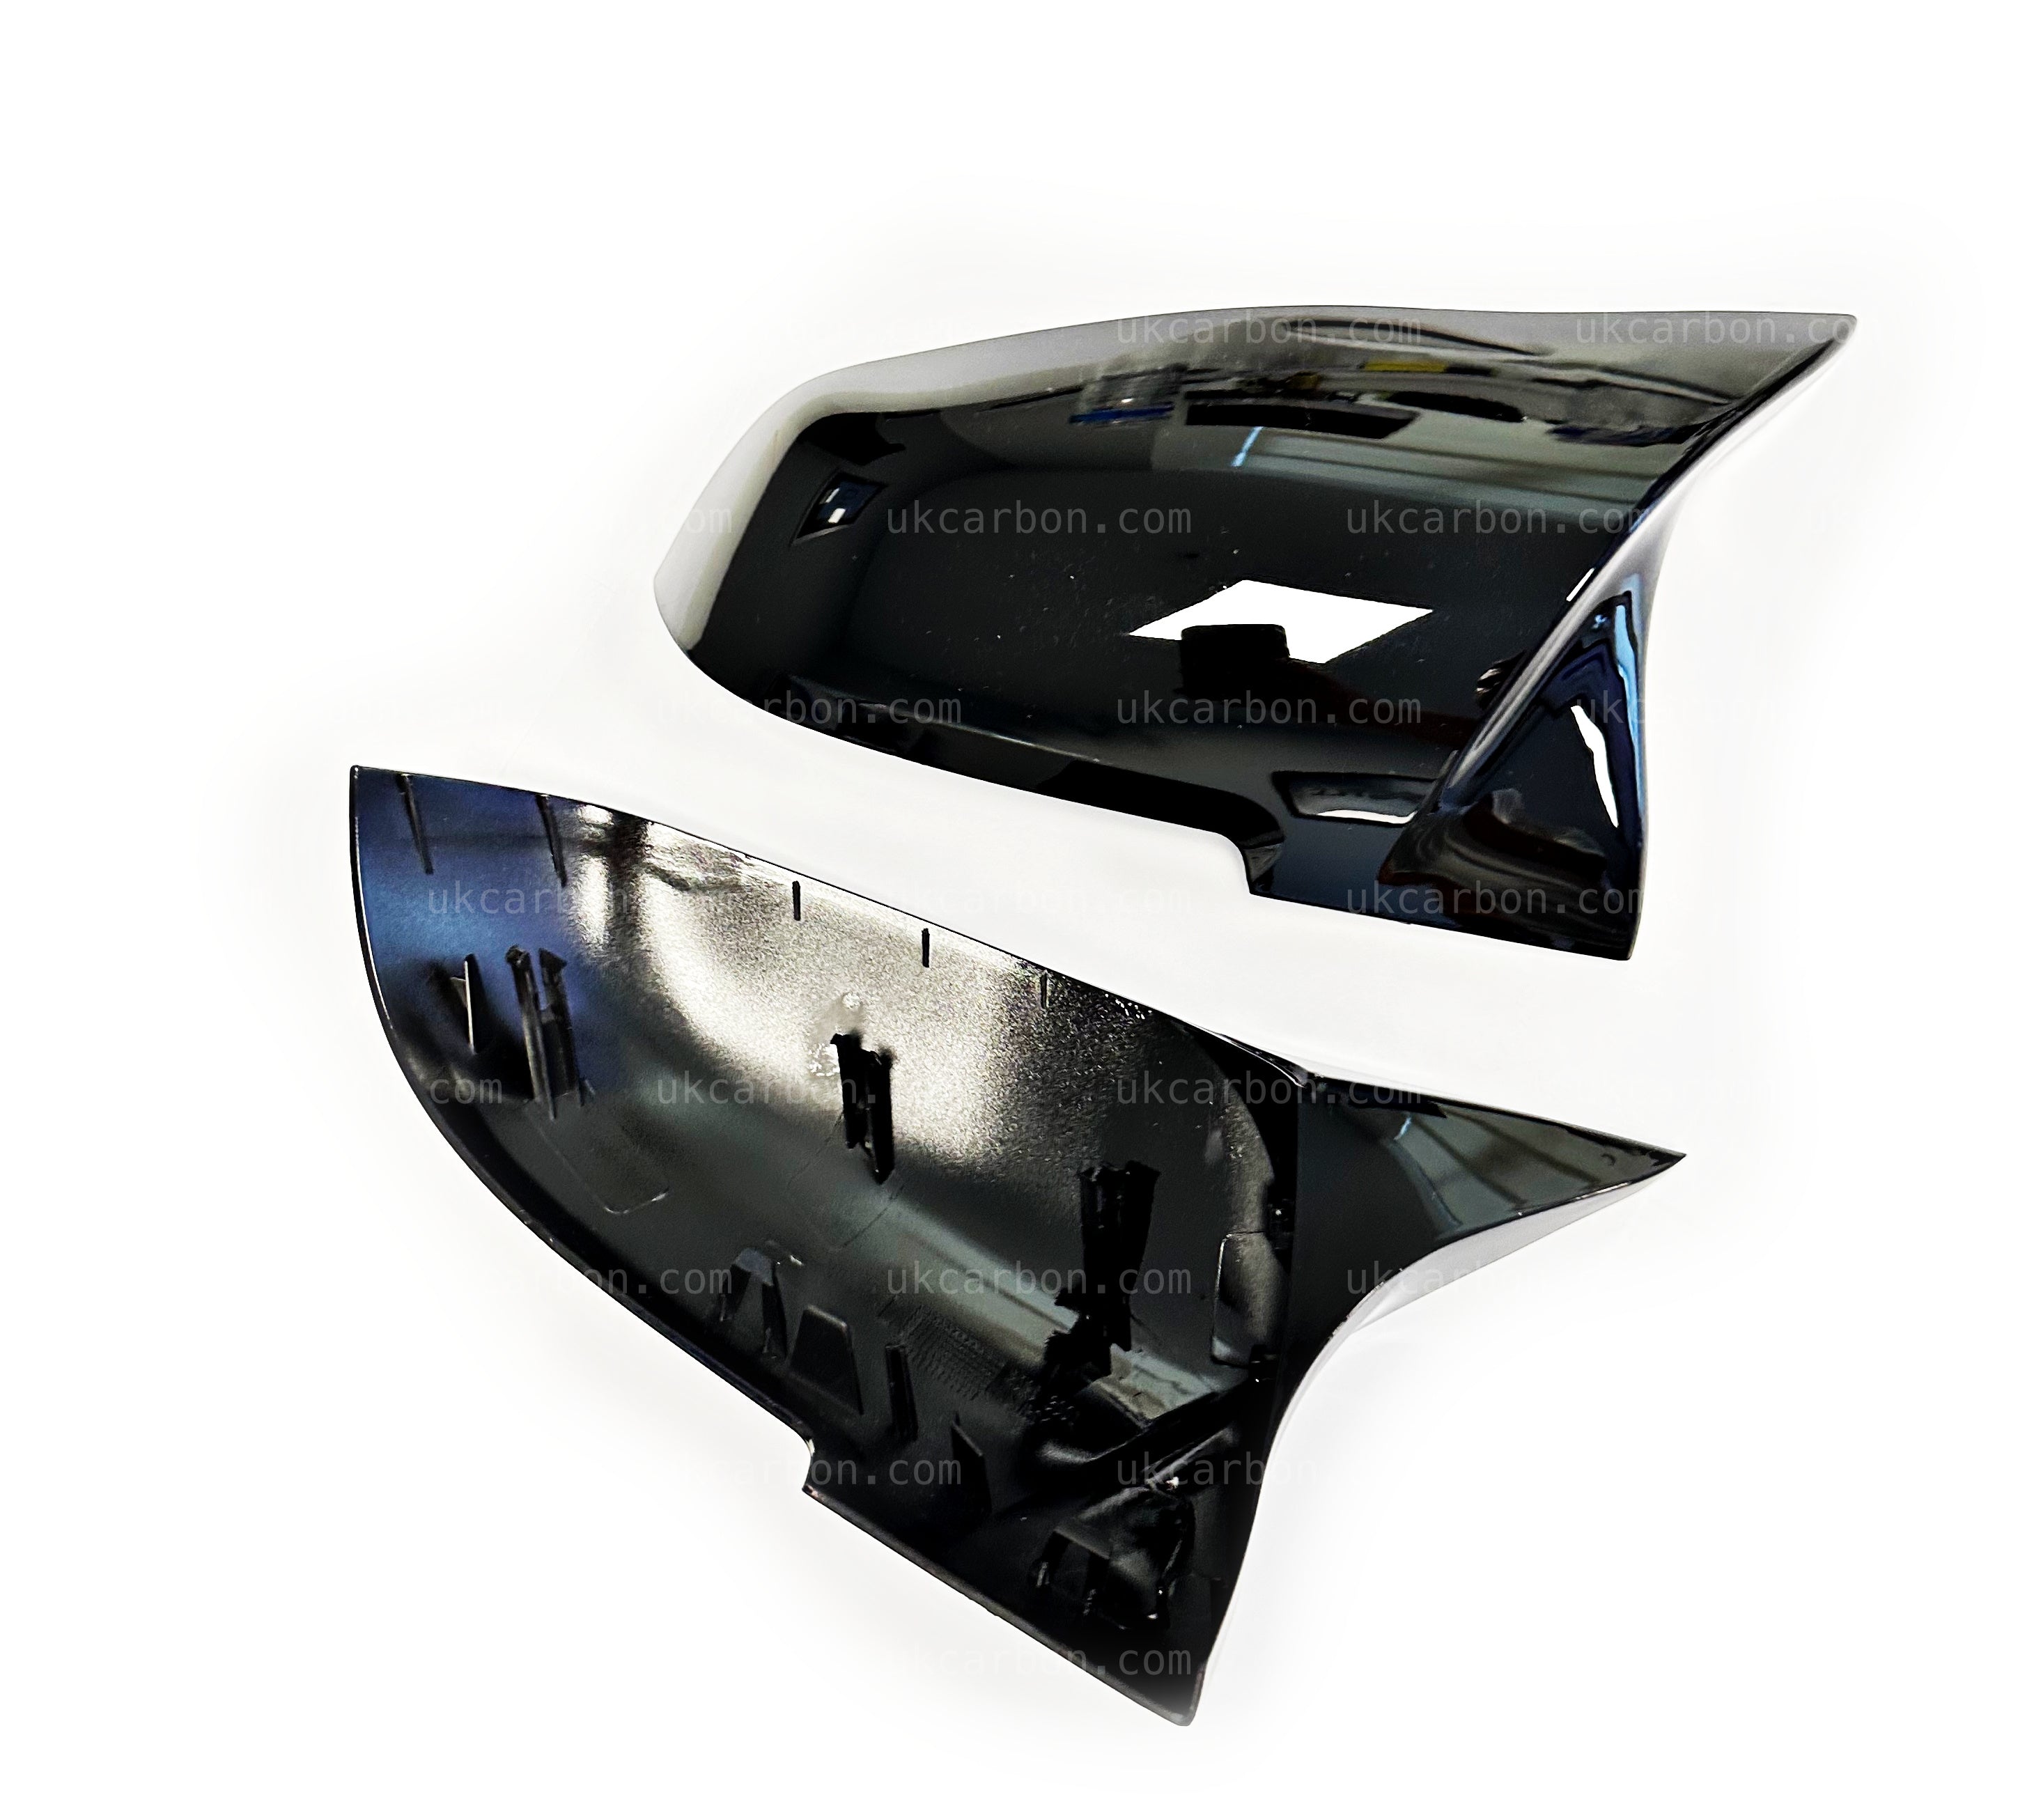 BMW 1 Series Gloss Black M Style Wing Mirror Cover Replacements F20 by UKCarbon